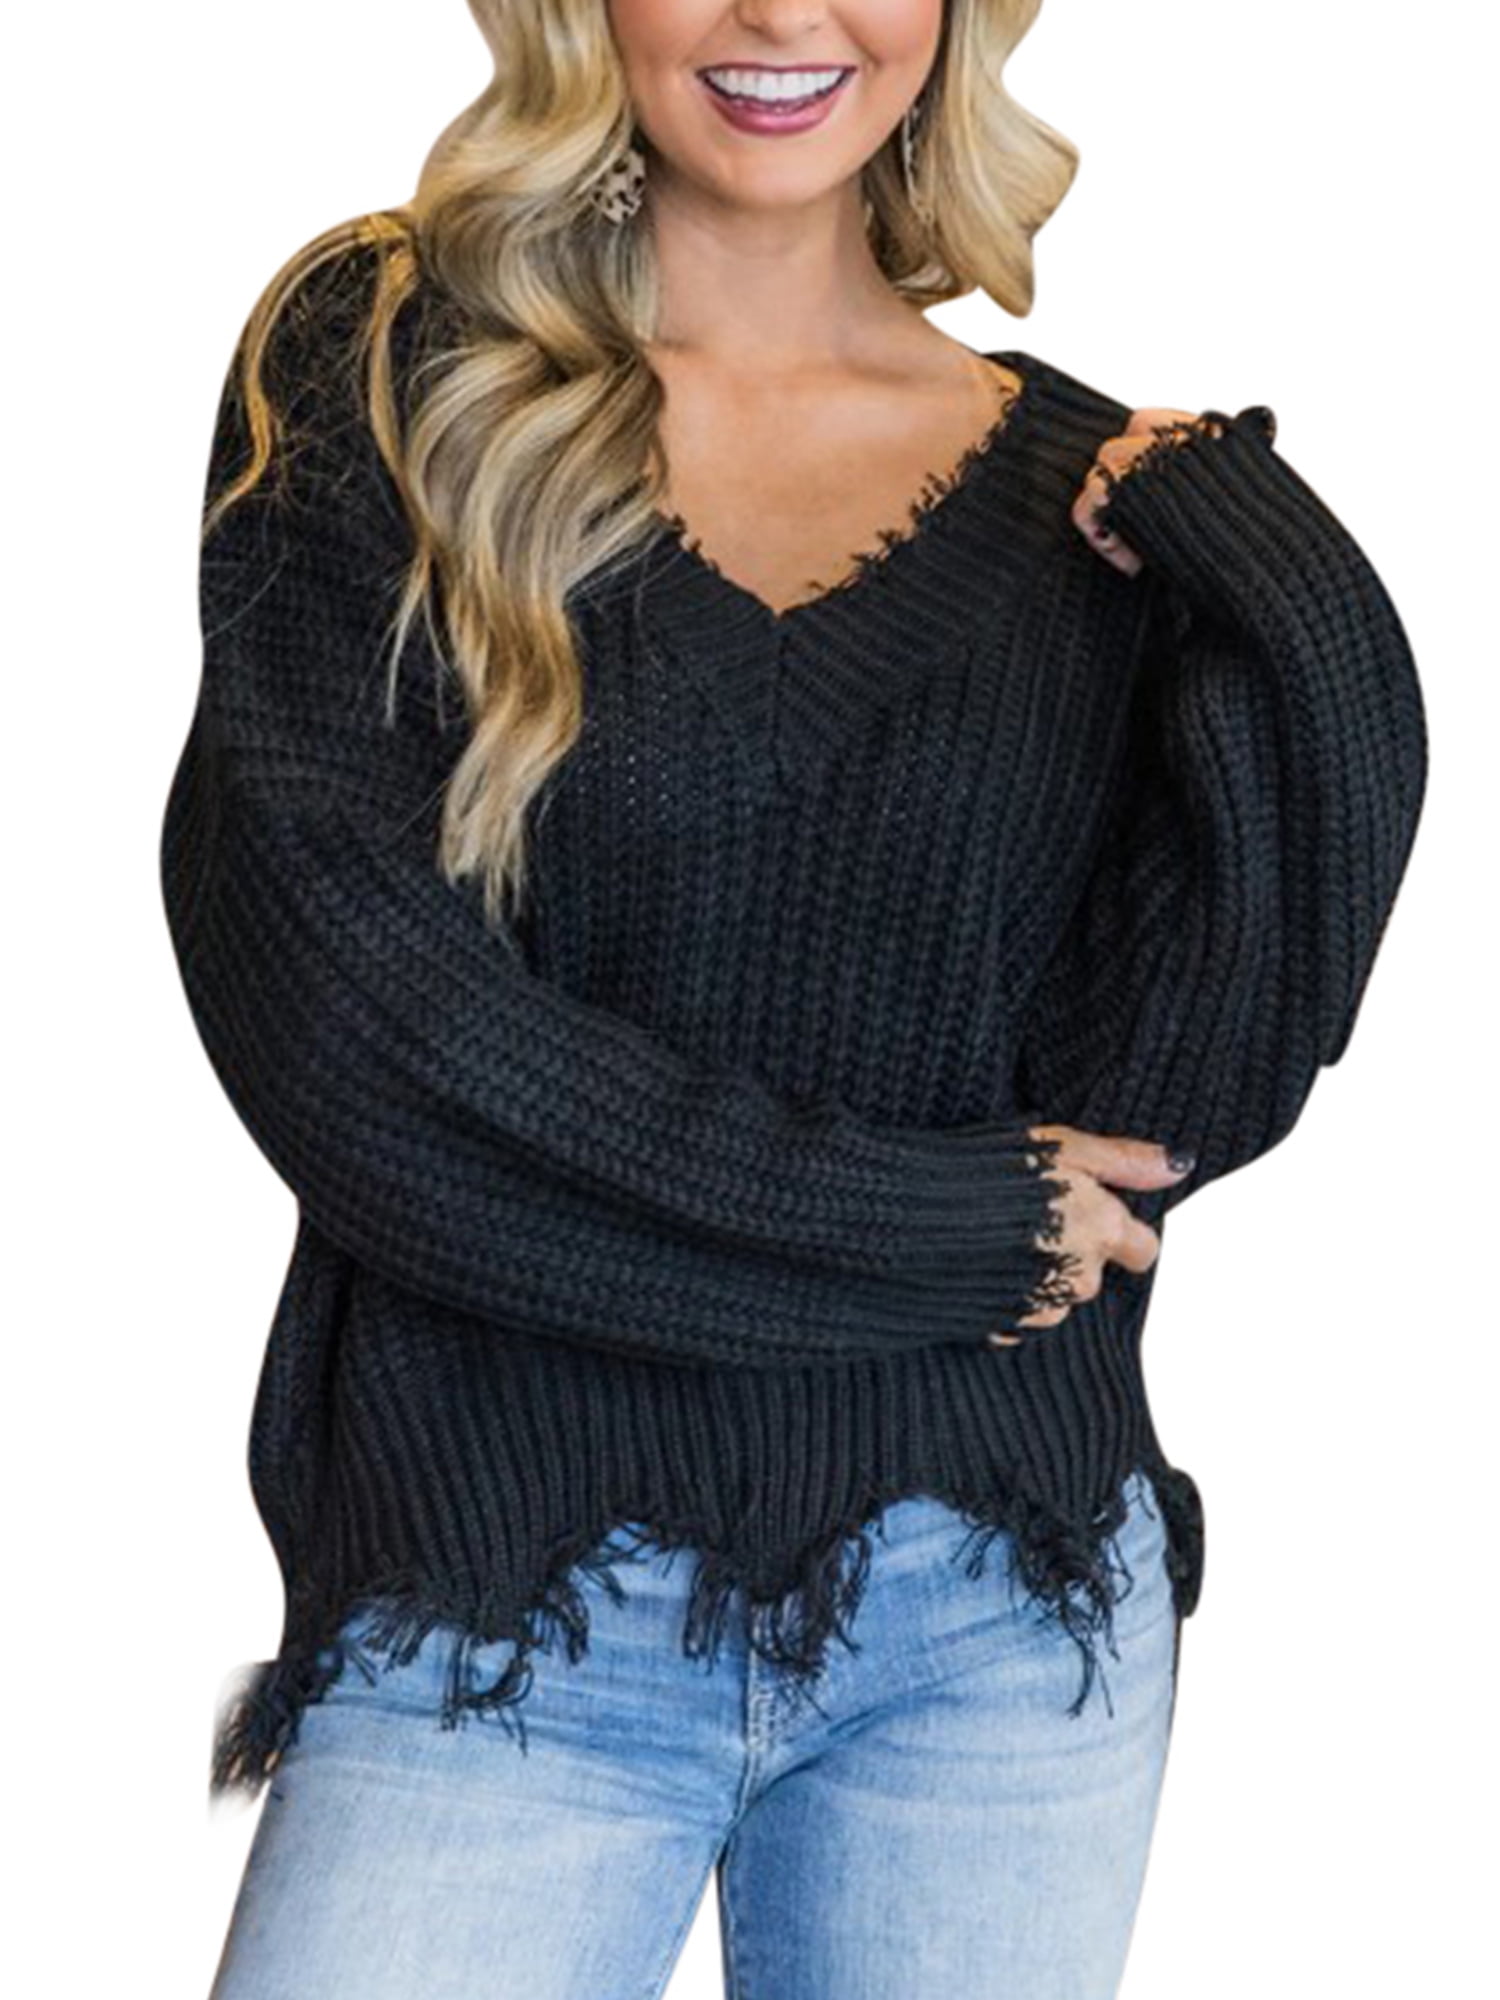 Fashion Women V-Neck Autumn Long Sleeve Knitted Sweater Loose Blouse Knitwear 